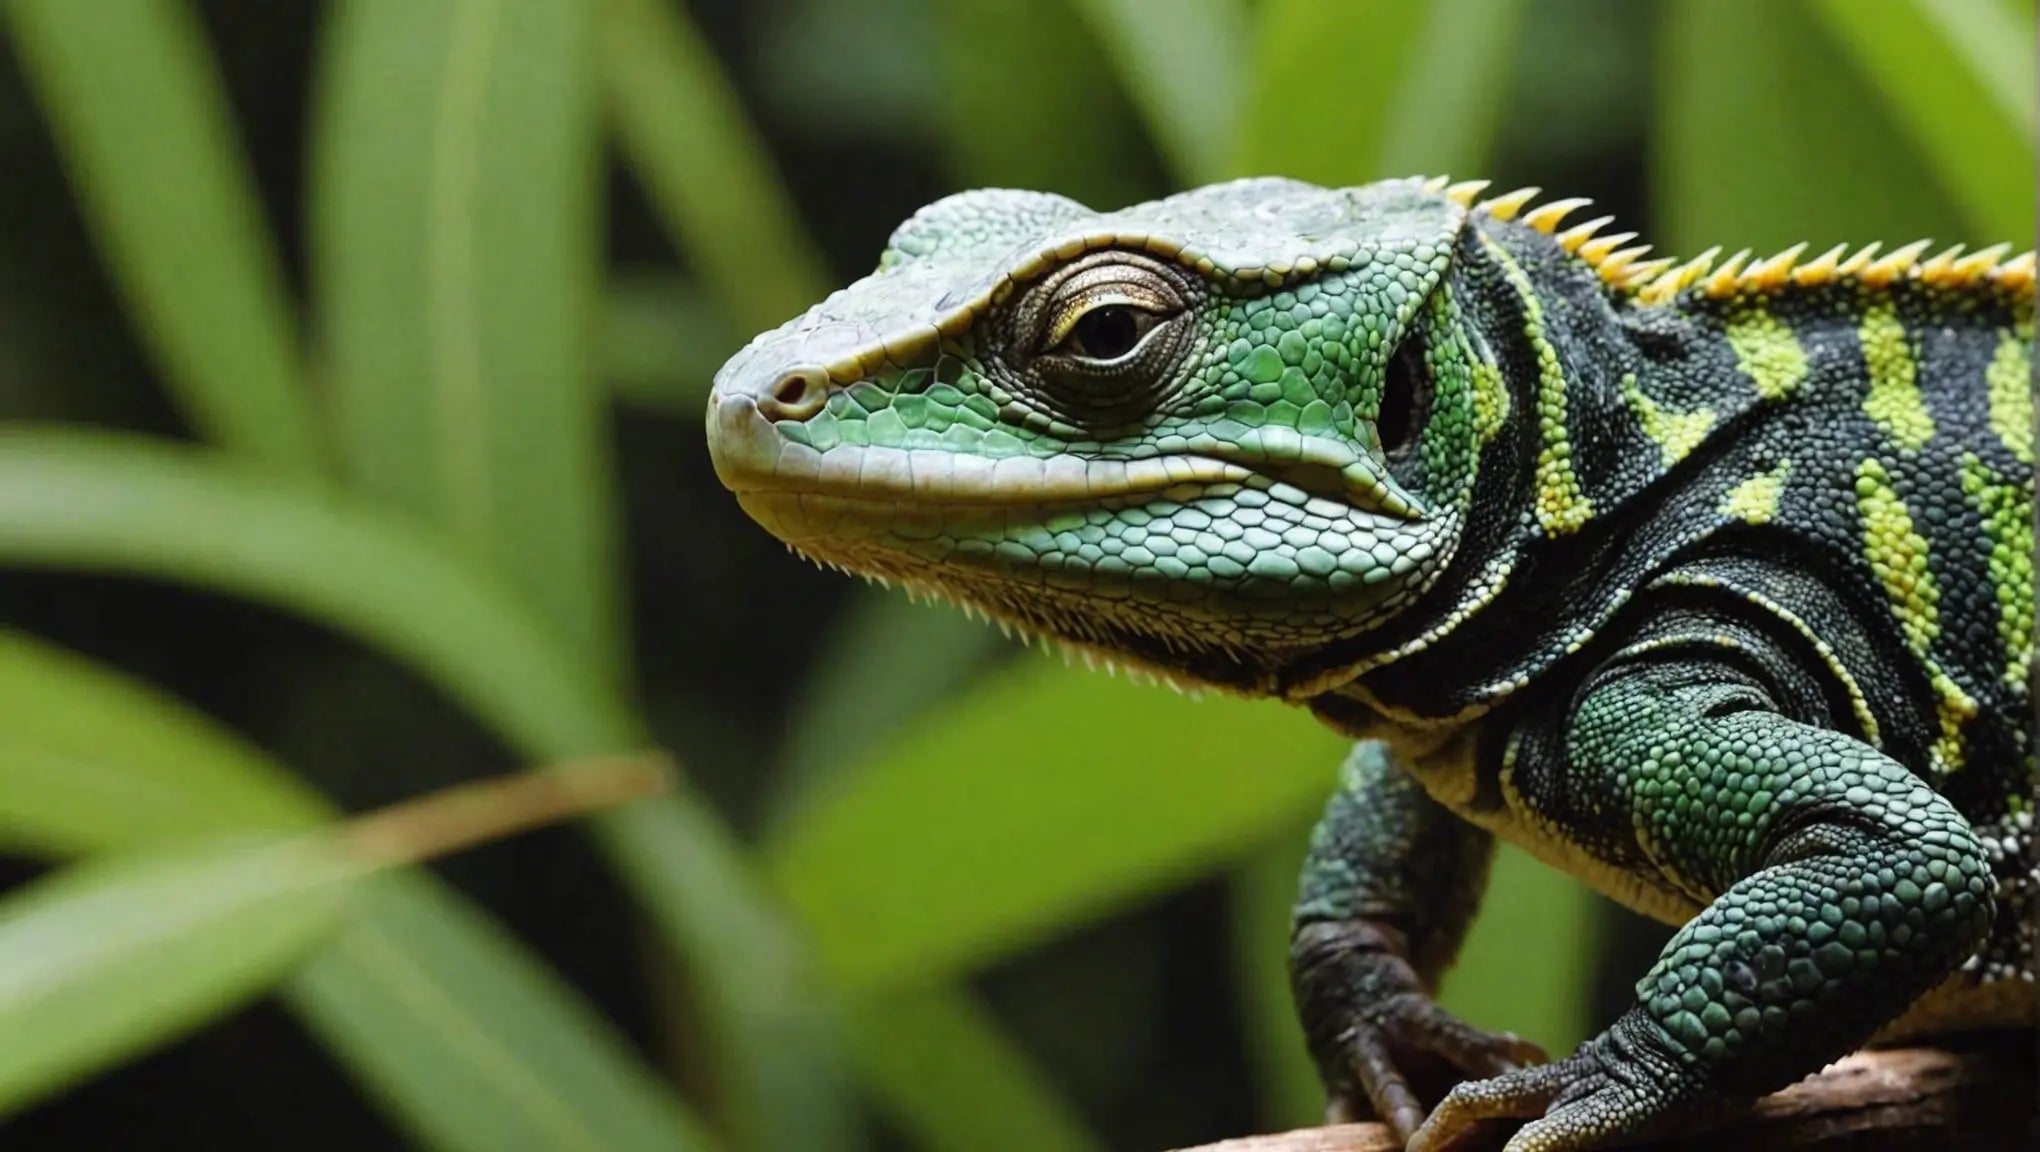 Why Gel Food is Essential for Reptile Care